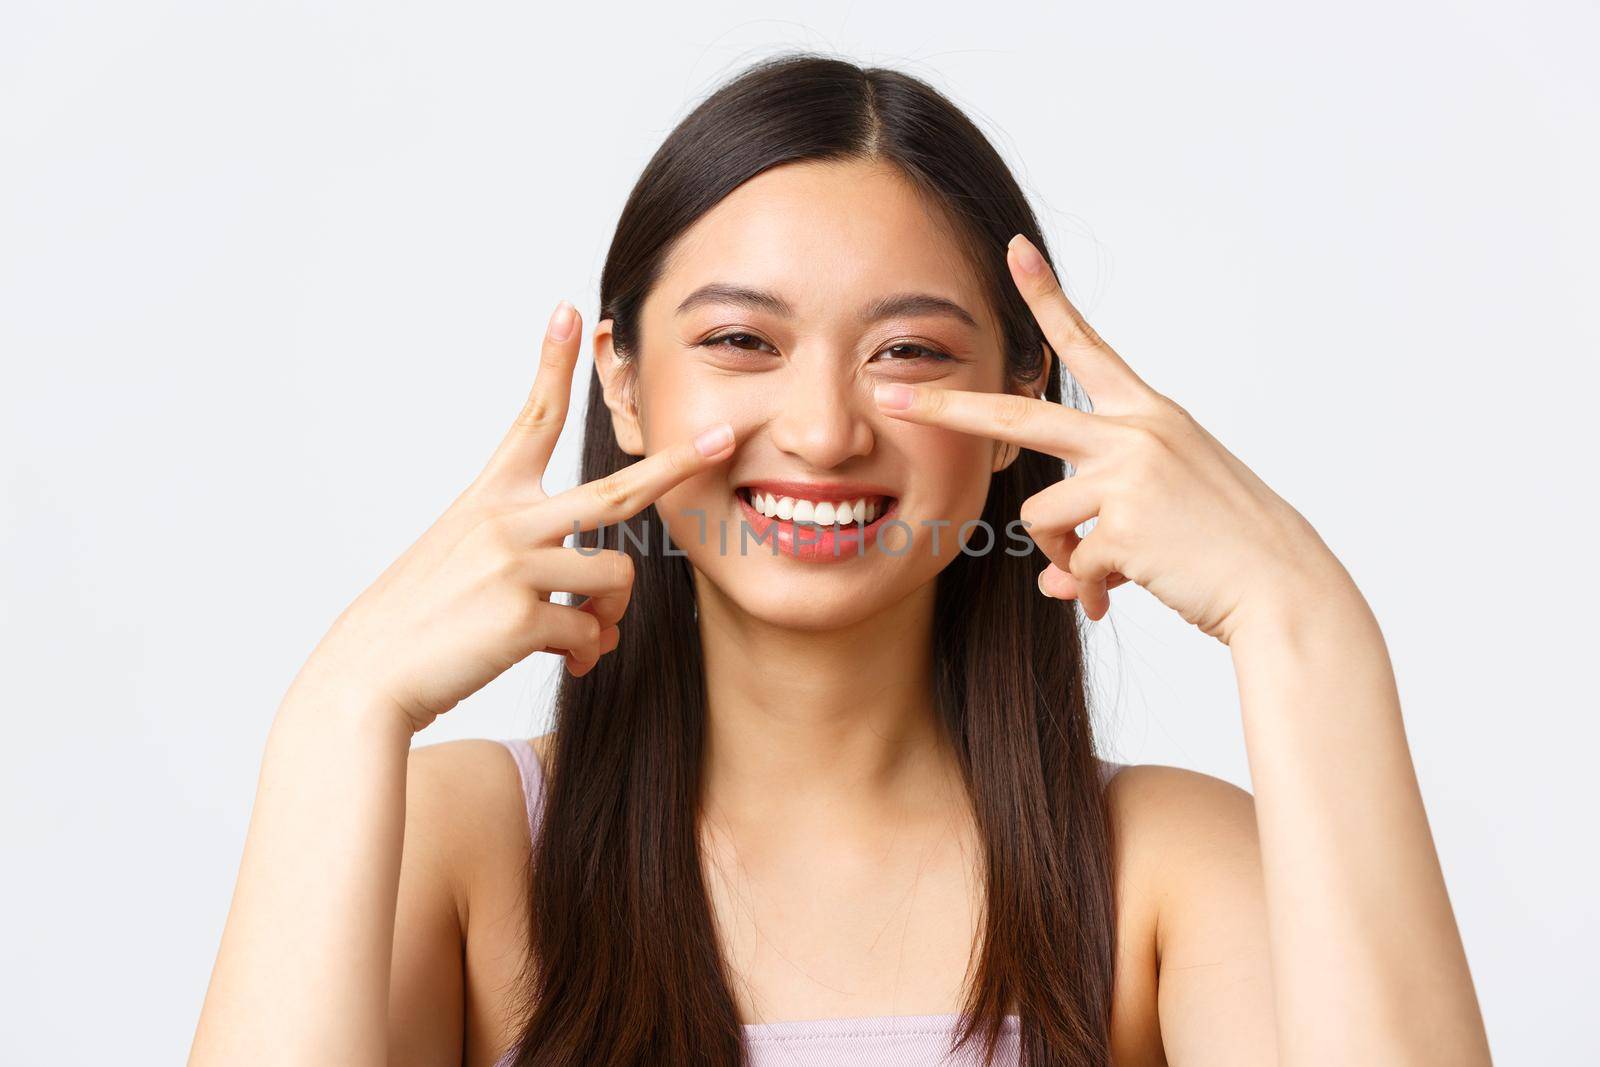 Concept of beauty, fashion and makeup products advertisement. Close-up portrait of carefree laughing, cute asian woman enjoying party, showing peace kawaii signs and smiling.